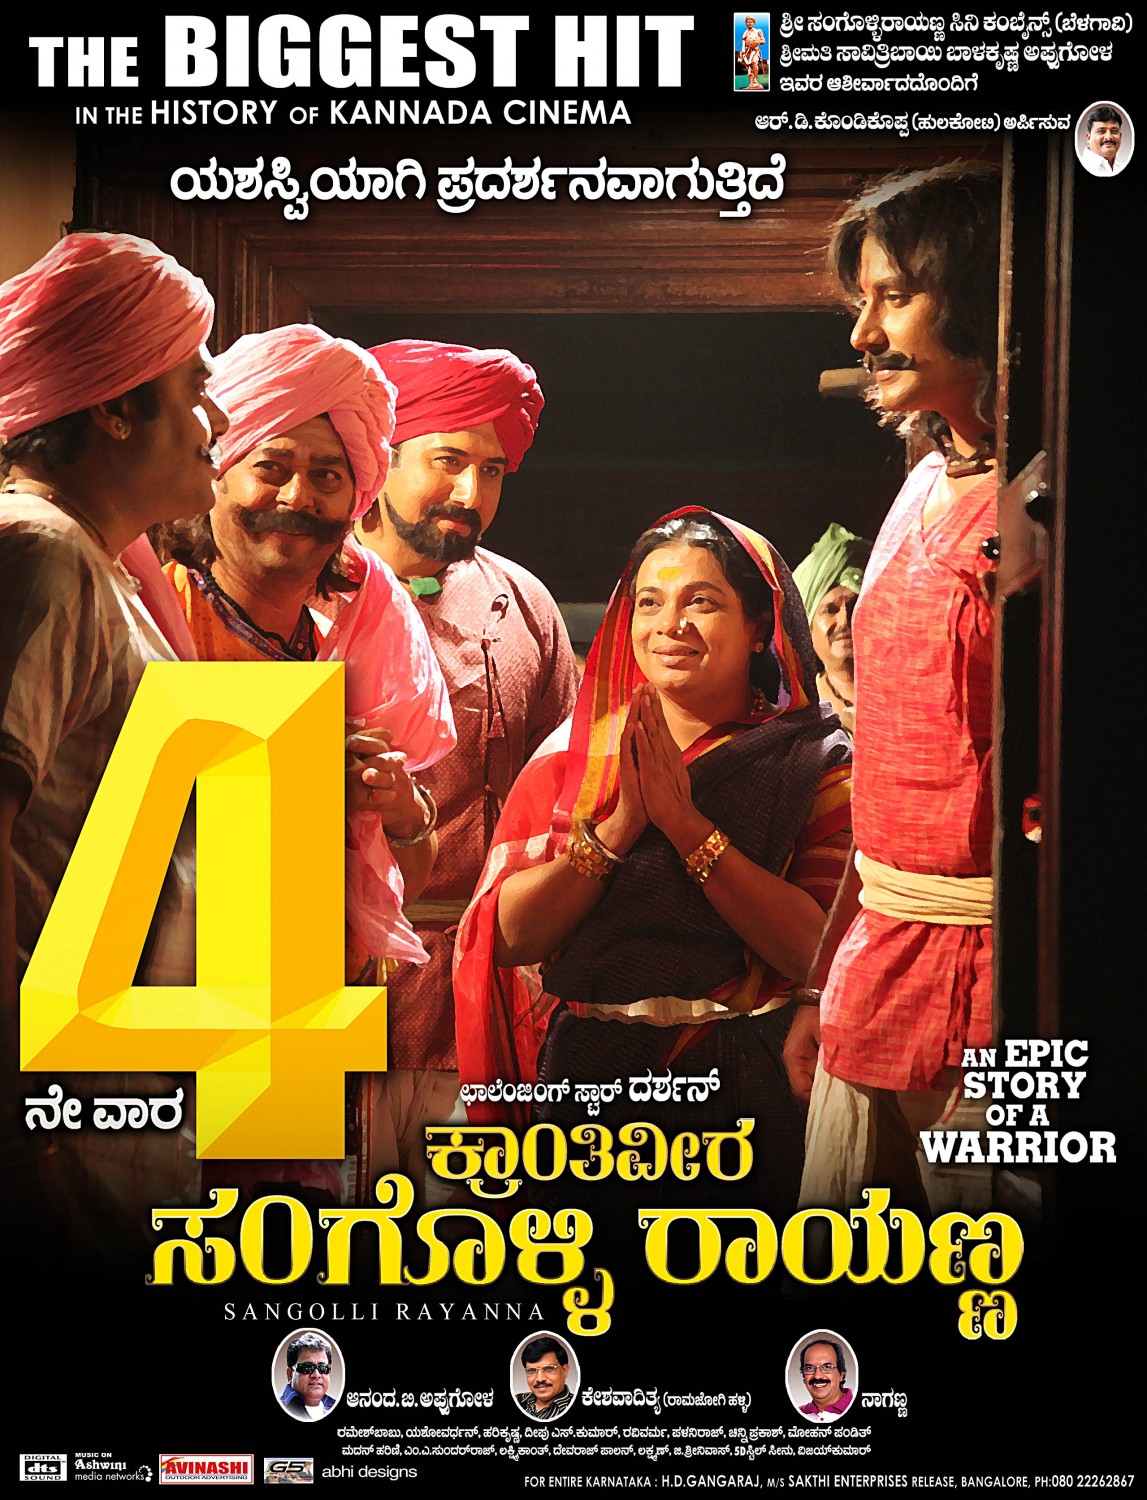 Extra Large Movie Poster Image for Sangolli Rayanna (#63 of 79)